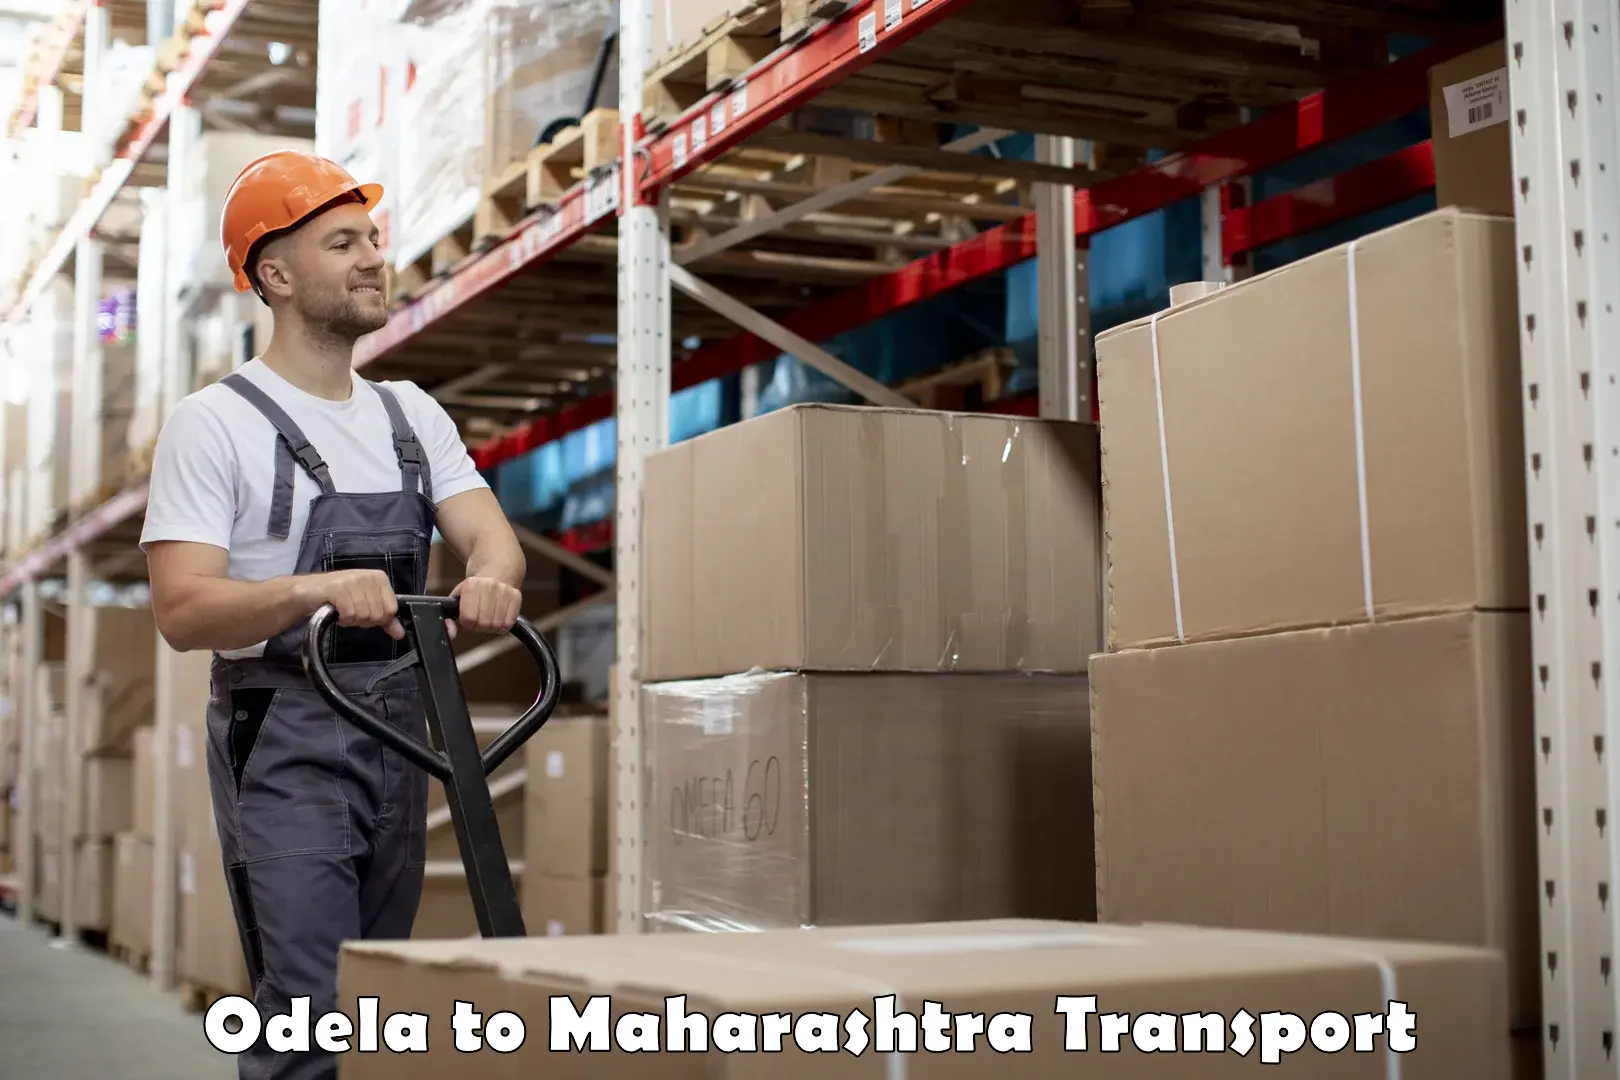 Truck transport companies in India Odela to Aheri